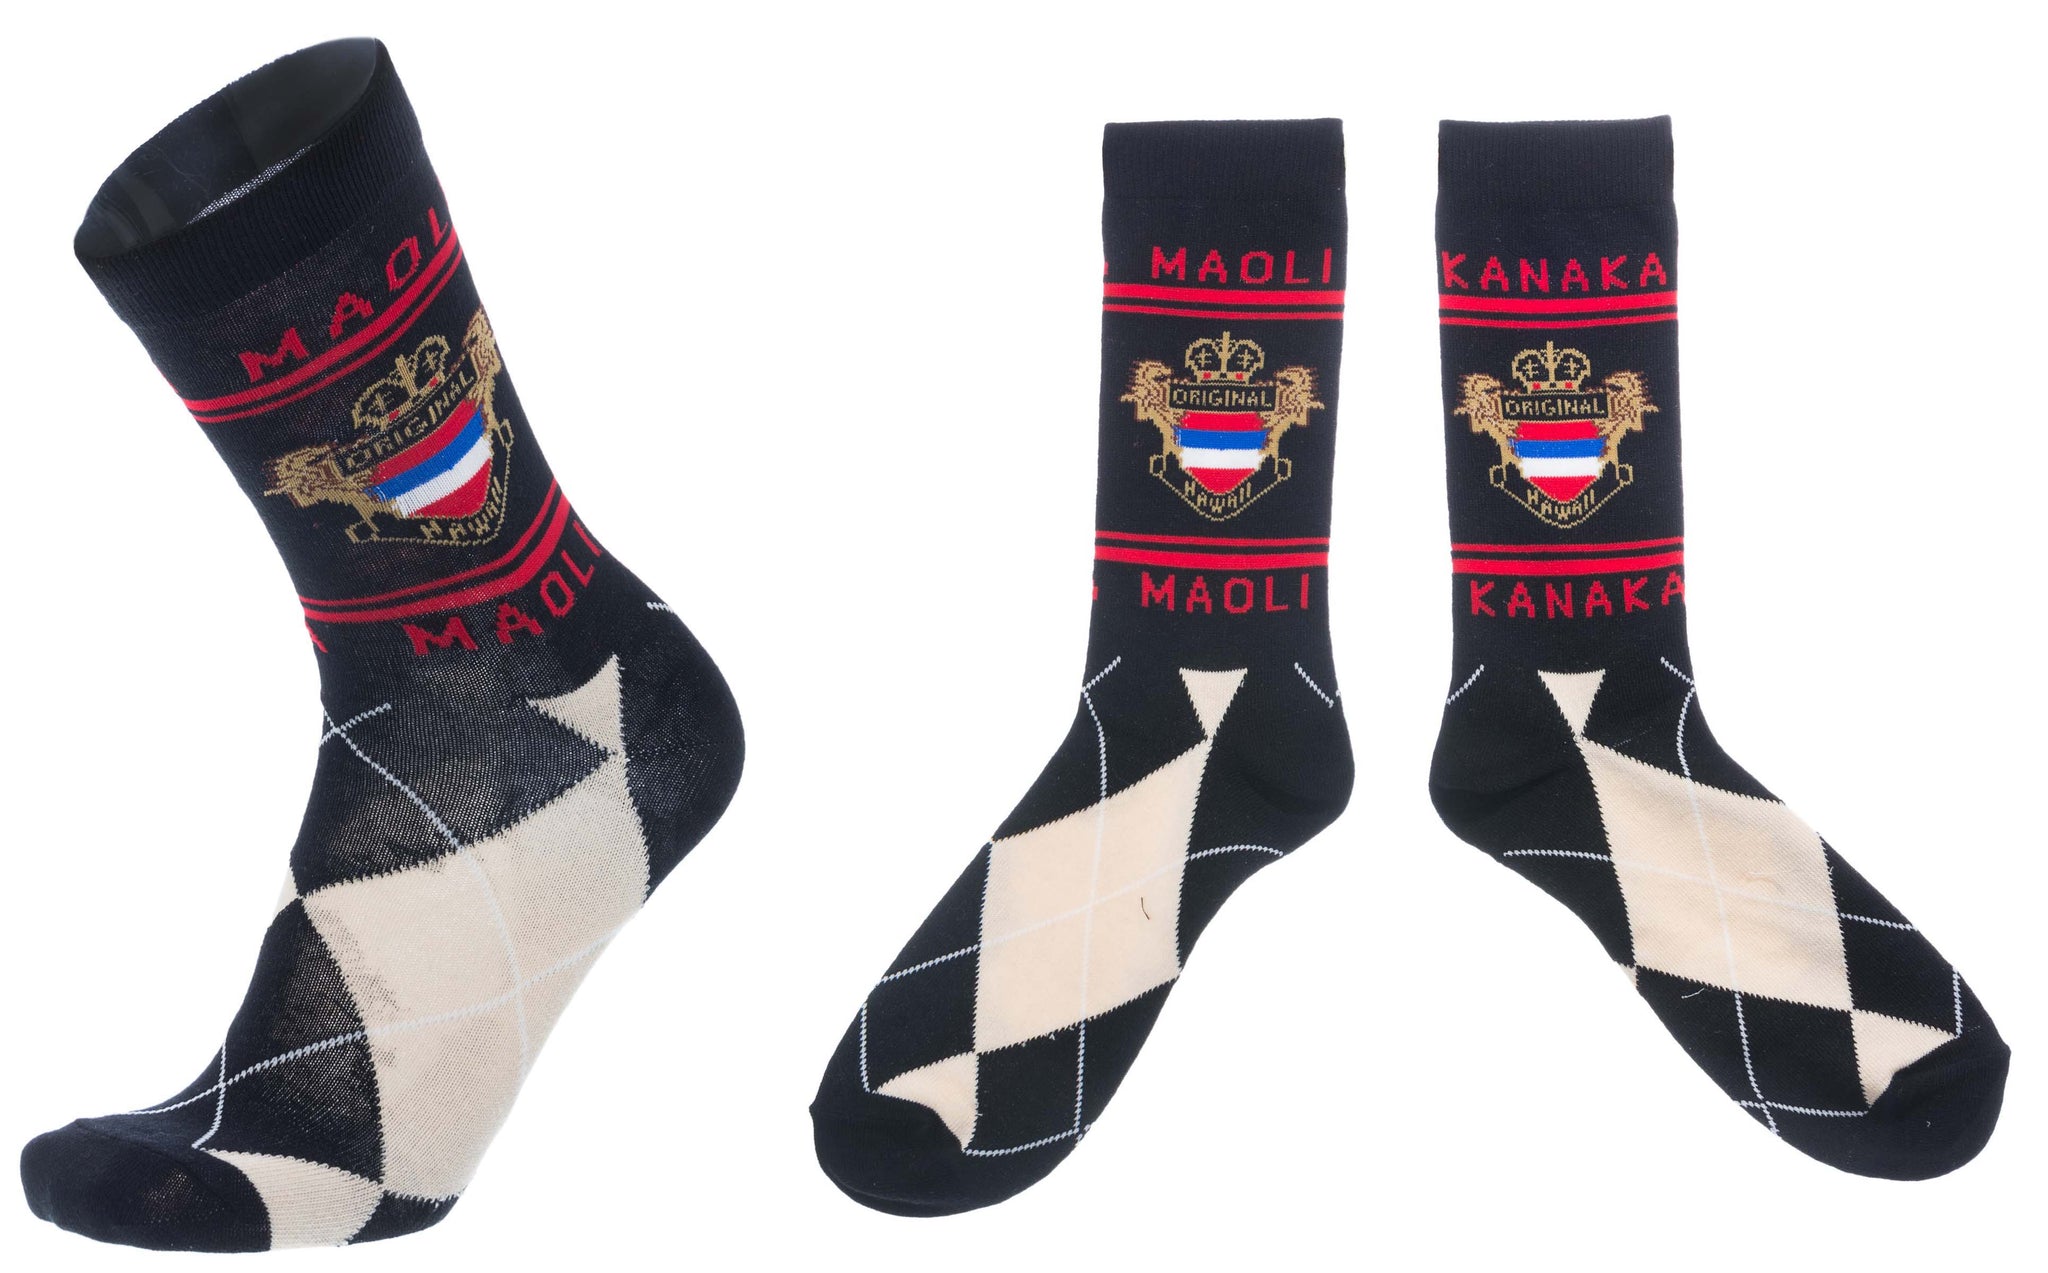 Experience Hawaiian bliss with our iconic crew sock